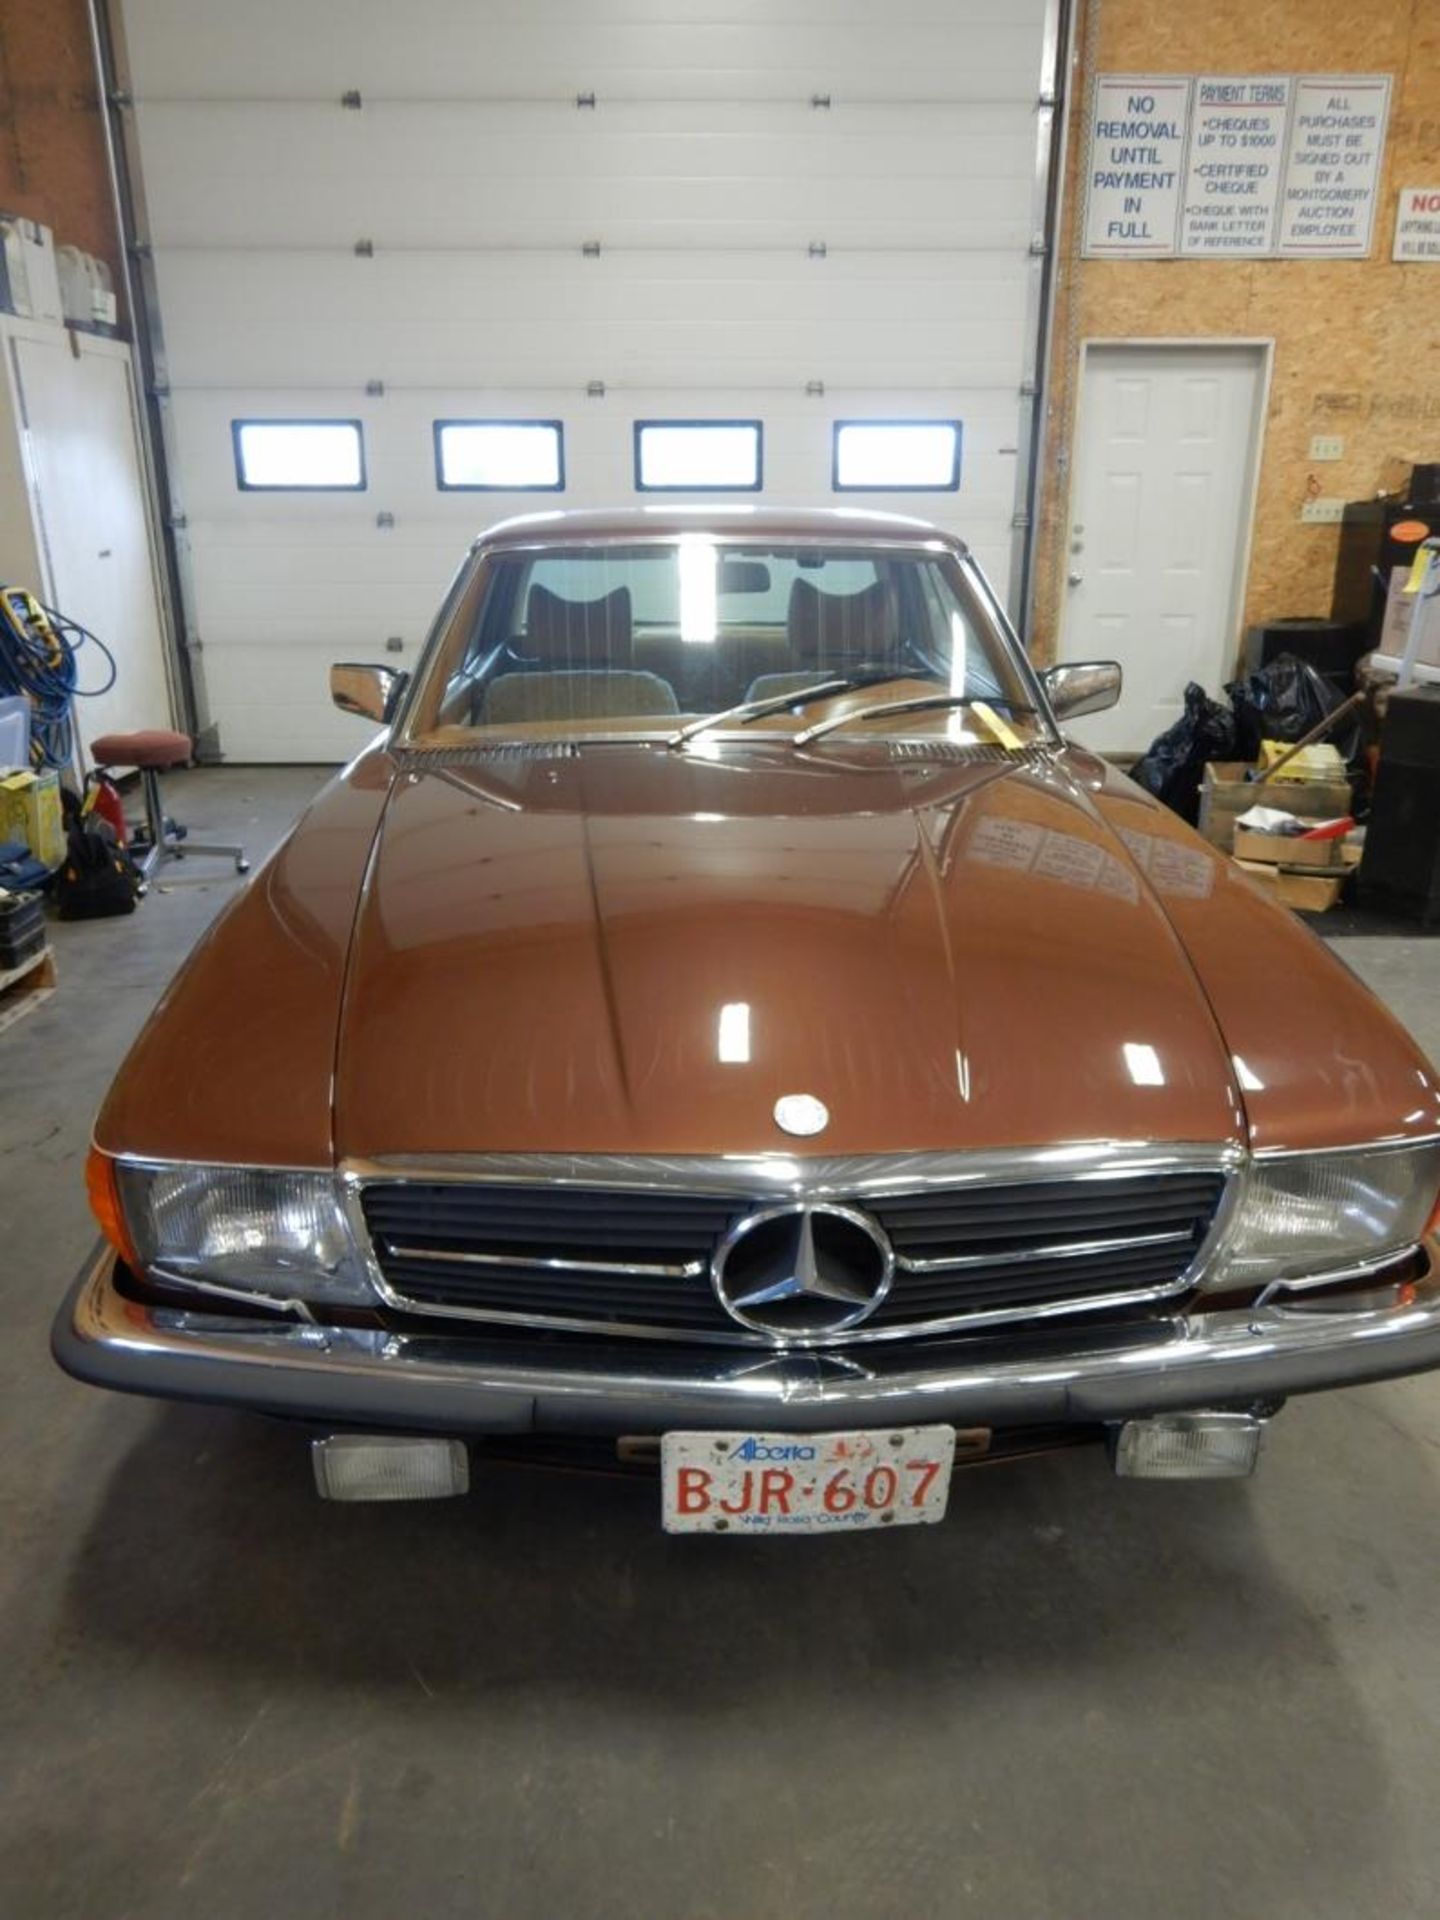 1978 MERCEDES-BENZ 450 SL C COUPE CAR, 2 DR, 2WD, AT, GAS, 227,849KMS, ONE OWNER - Image 15 of 19